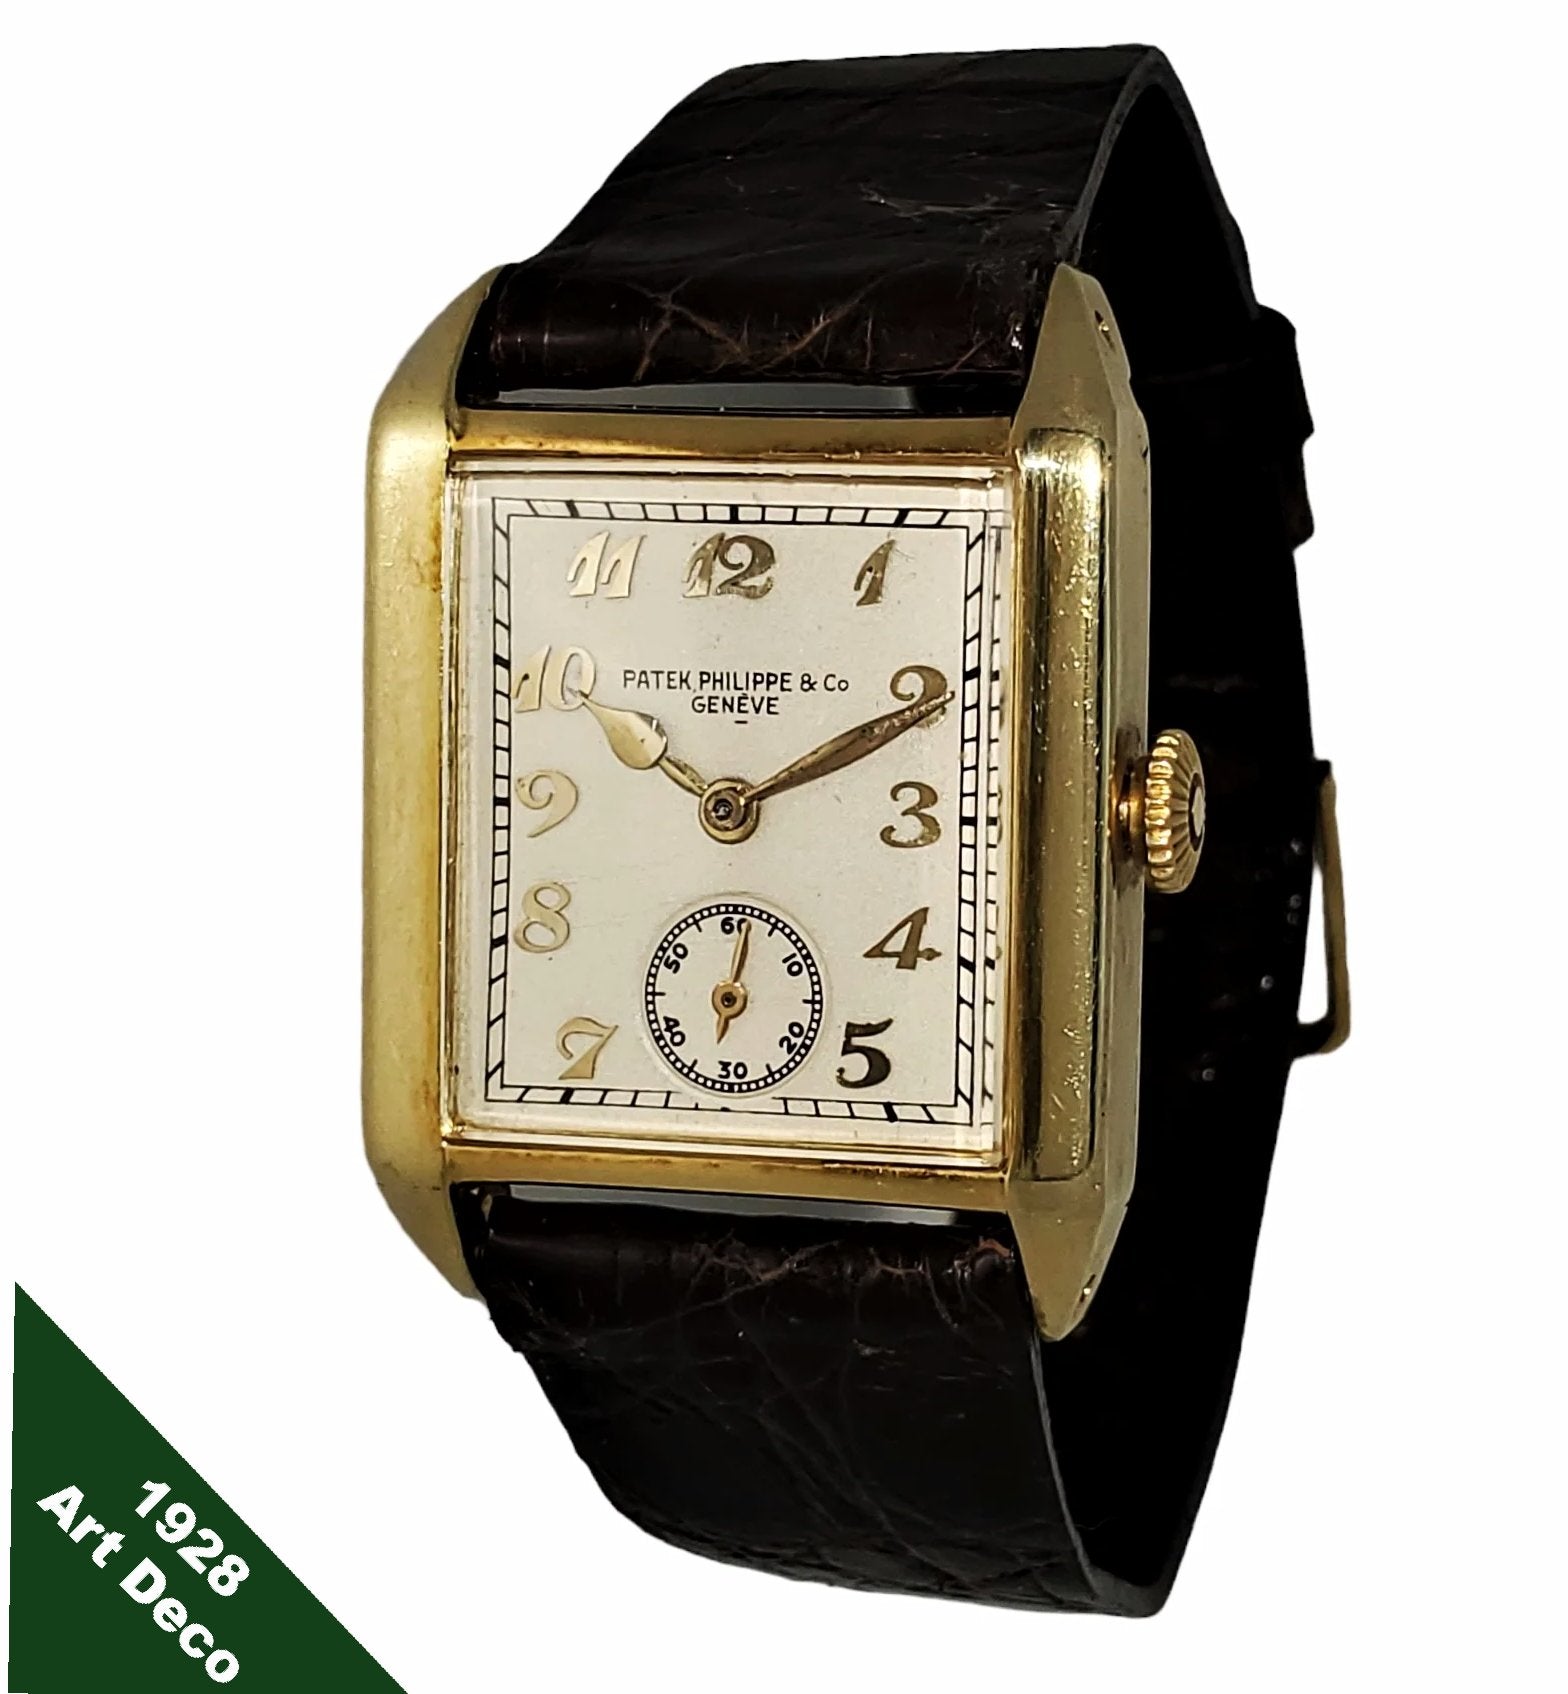 Patek Philippe early Art Deco rectangular tank style watch, made in 18K  with Breguet numerals Circa 1928